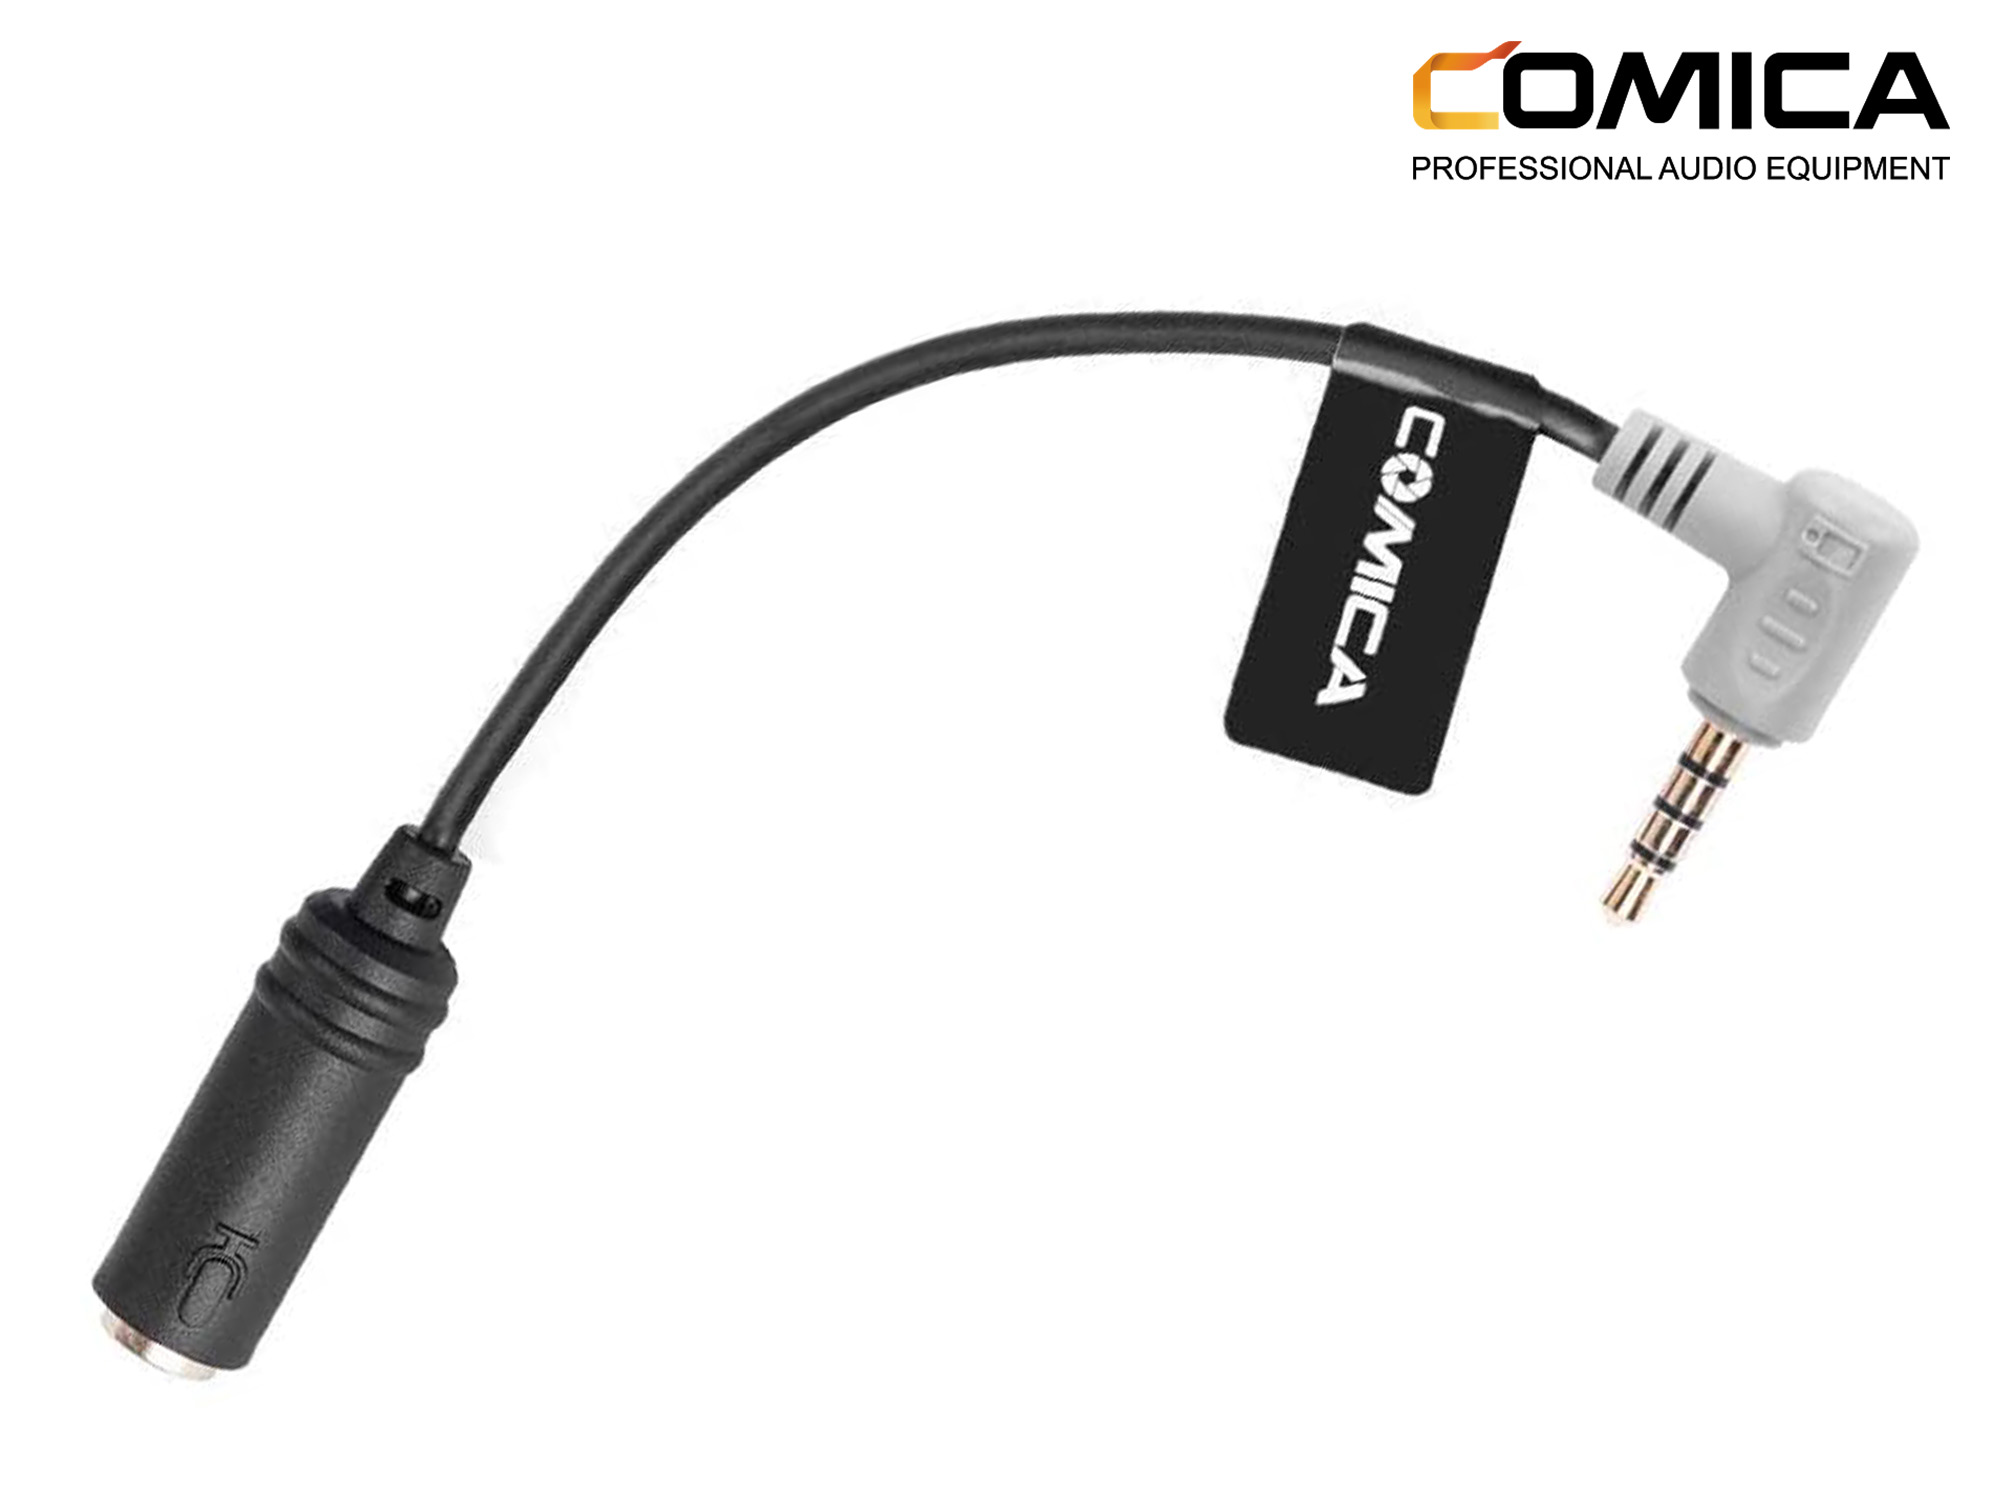 Comica Audio TRS-TRRS Audio Cable Adapter For Smartphone